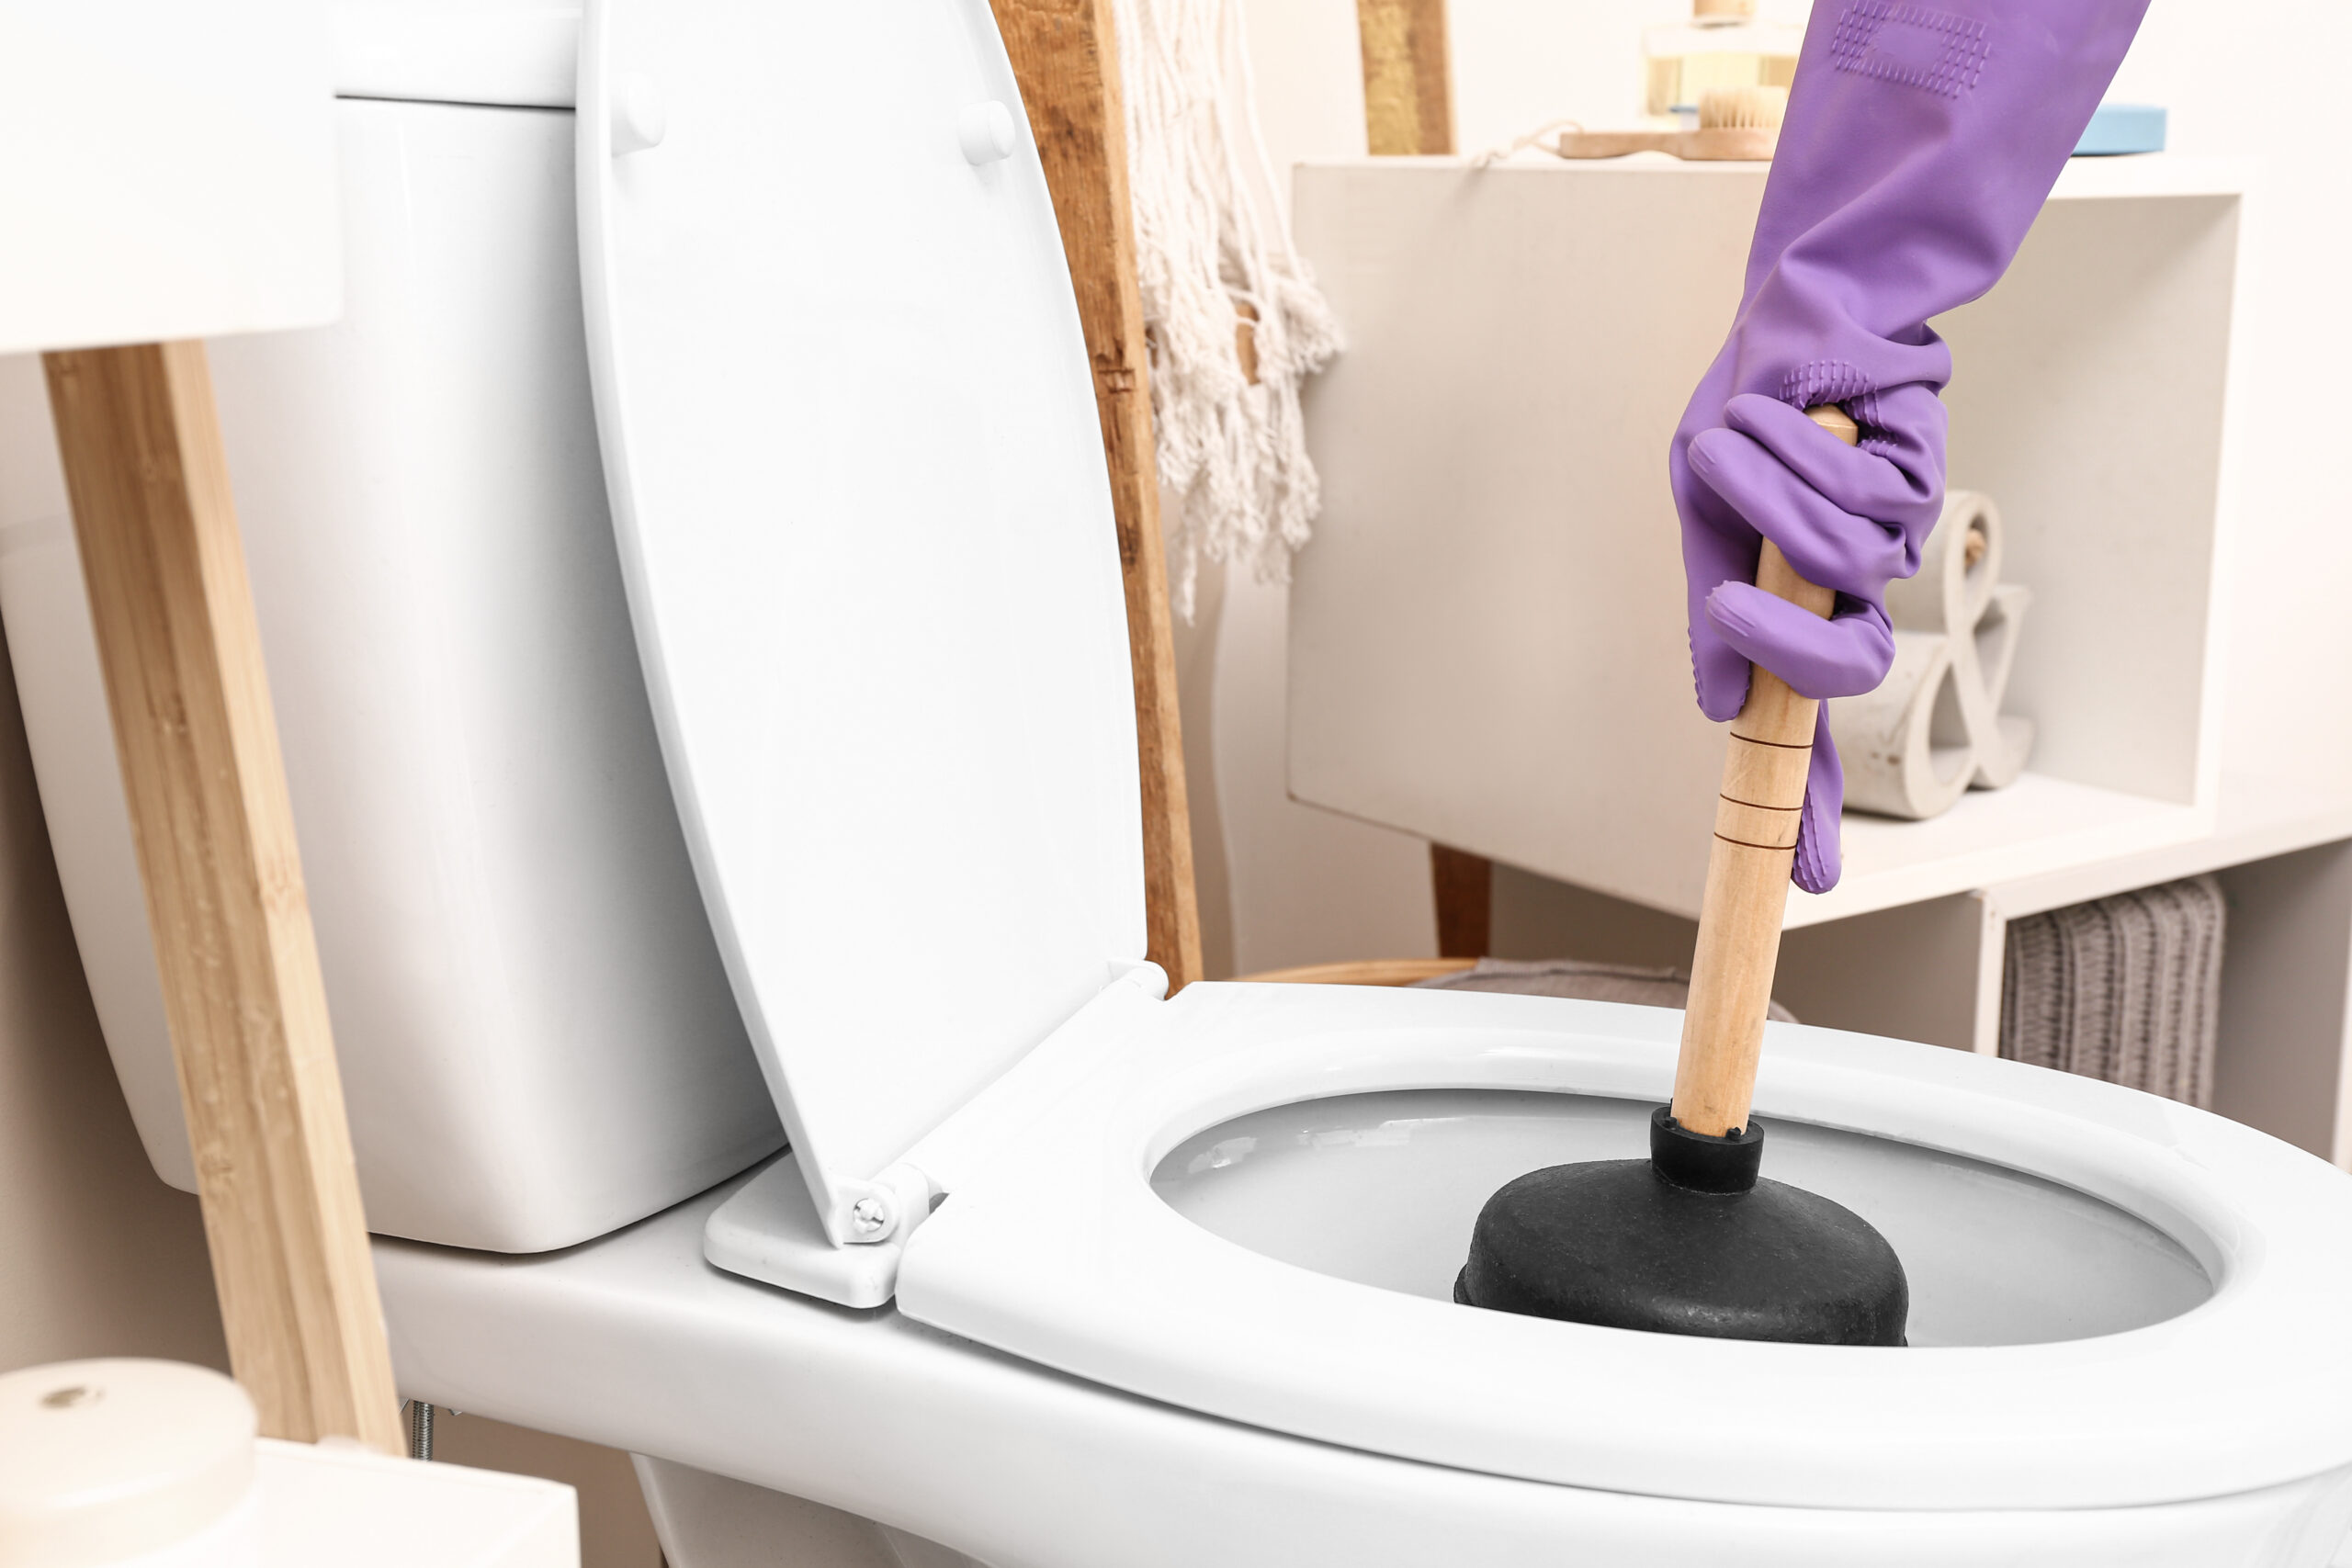 Person wearing a purple glove using plunger to unclog toilet.